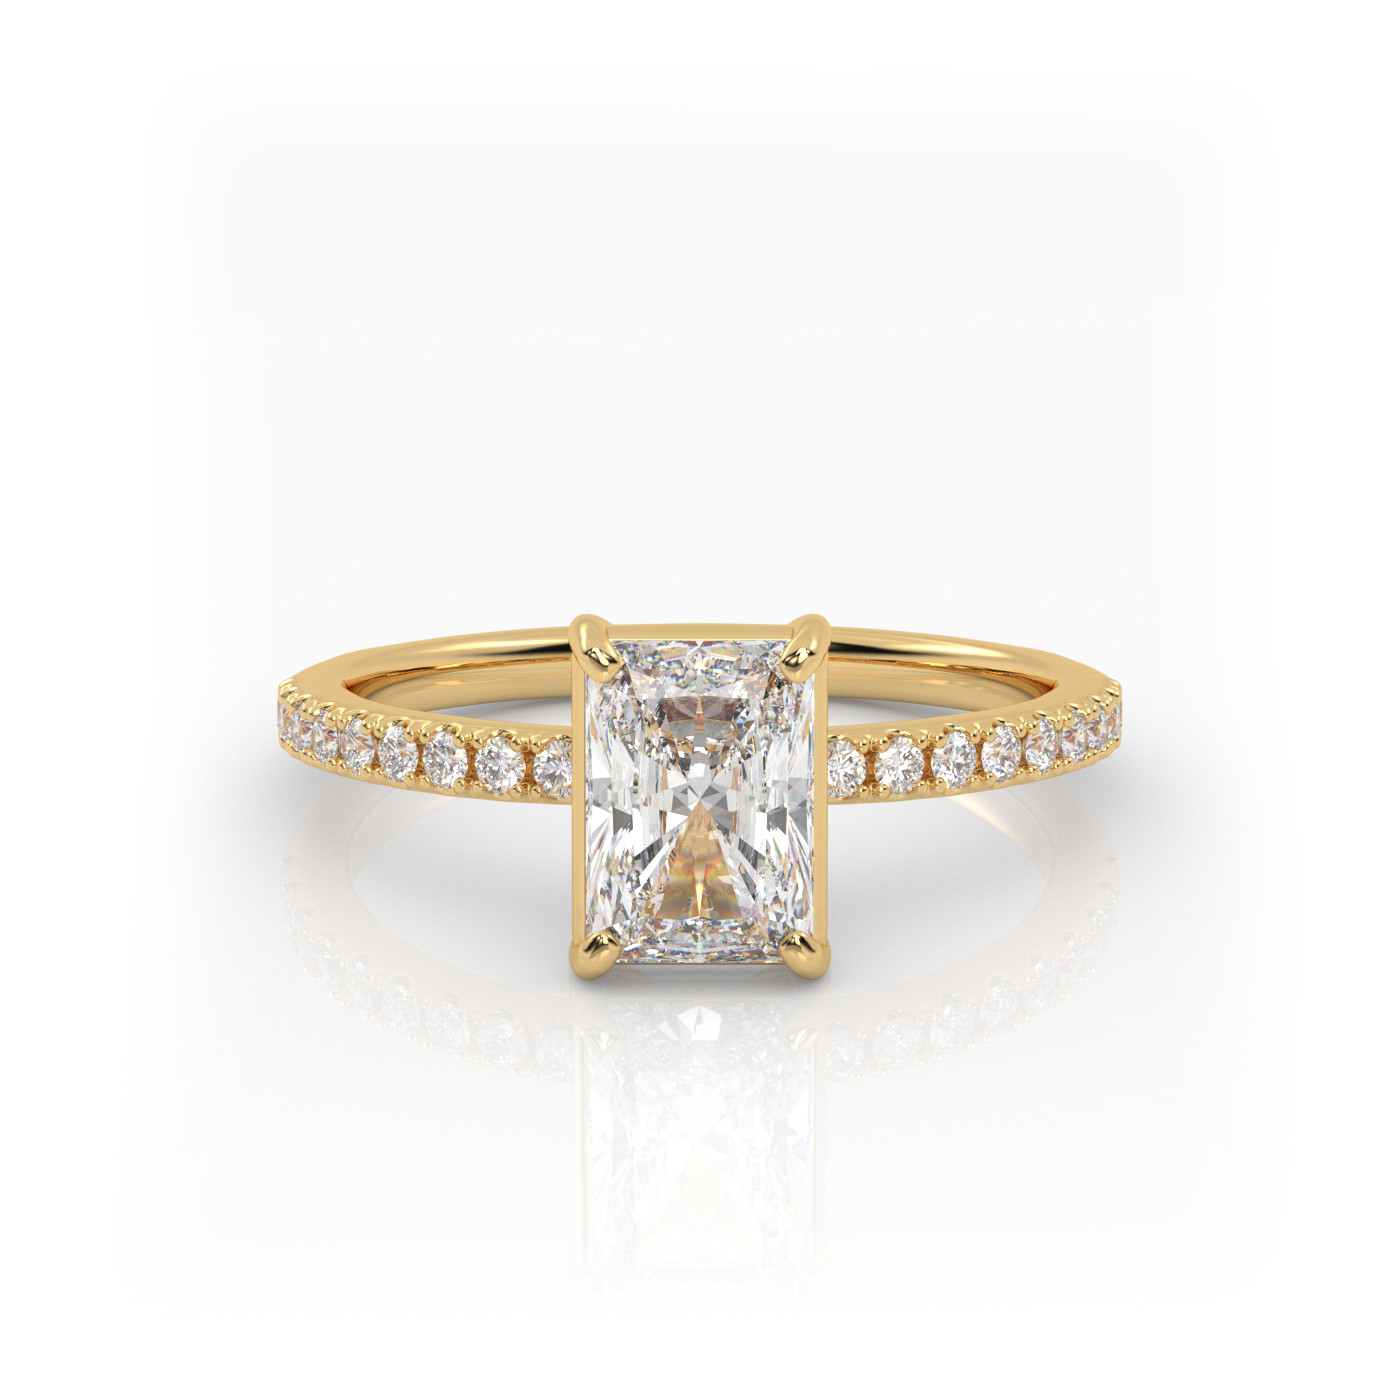 18K YELLOW GOLD Radiant Diamond Cut Solitaire Engagement Ring with Pave Band.